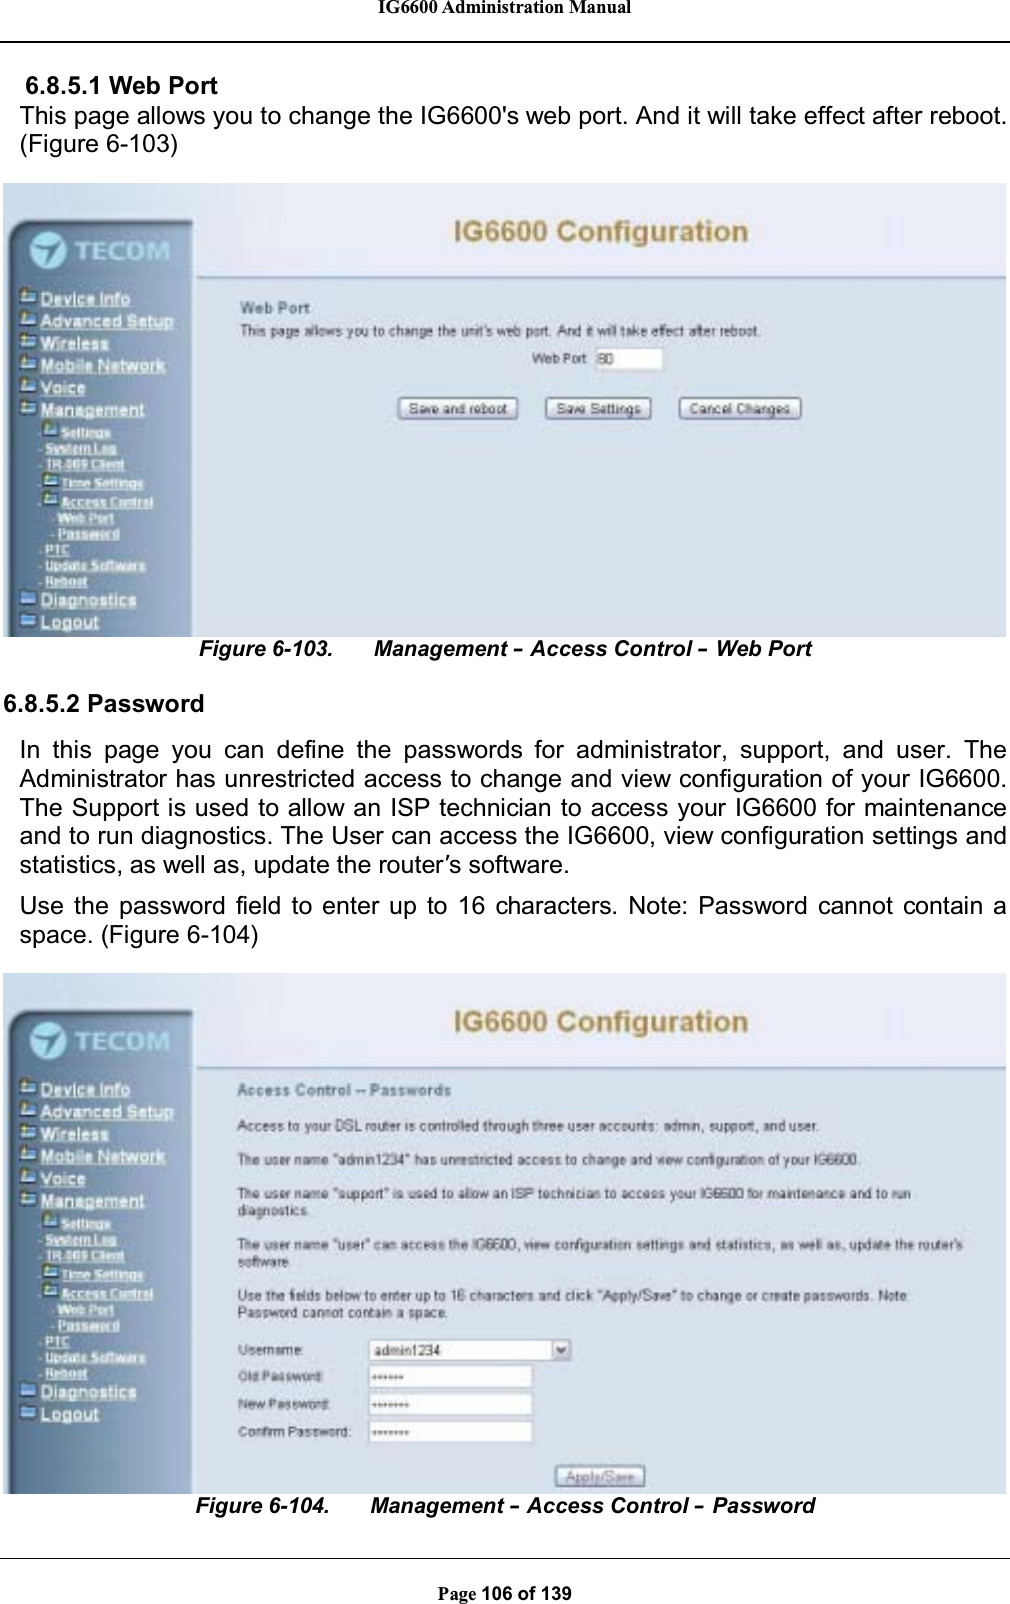 IG6600 Administration ManualPage 106 of 1396.8.5.1 Web PortThis page allows you to change the IG6600&apos;s web port. And it will take effect after reboot.(Figure 6-103)Figure 6-103. Management –Access Control –Web Port6.8.5.2 PasswordIn this page you can define the passwords for administrator, support, and user. TheAdministrator has unrestricted access to change and view configuration of your IG6600.The Support is used to allow an ISP technician to access your IG6600 for maintenanceand to run diagnostics. The User can access the IG6600, view configuration settings andstatistics, as well as, update the router’s software.Use the password field to enter up to 16 characters. Note: Password cannot contain aspace. (Figure 6-104)Figure 6-104. Management –Access Control –Password